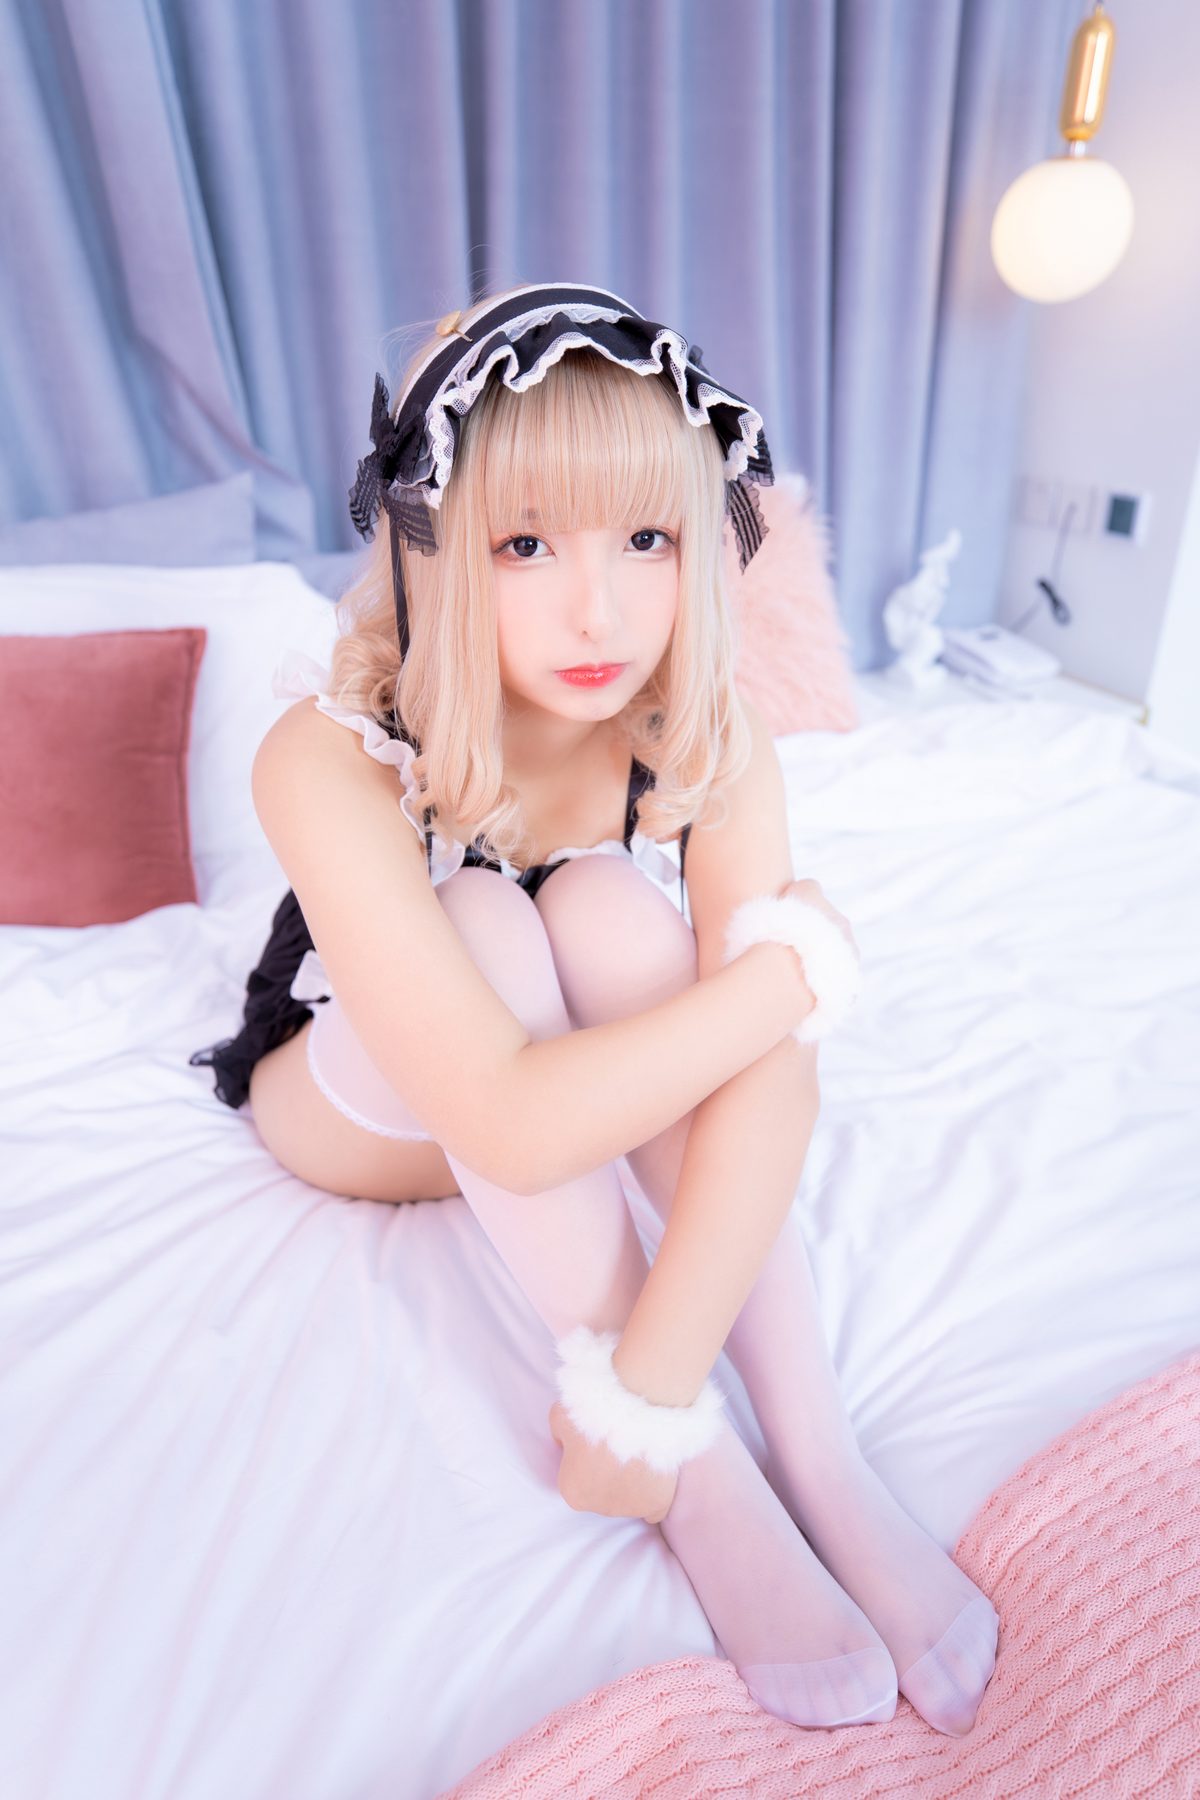 View - Coser@神楽坂真冬 Vol.053 电子相册-猫少女《ねこタイム》 A - 